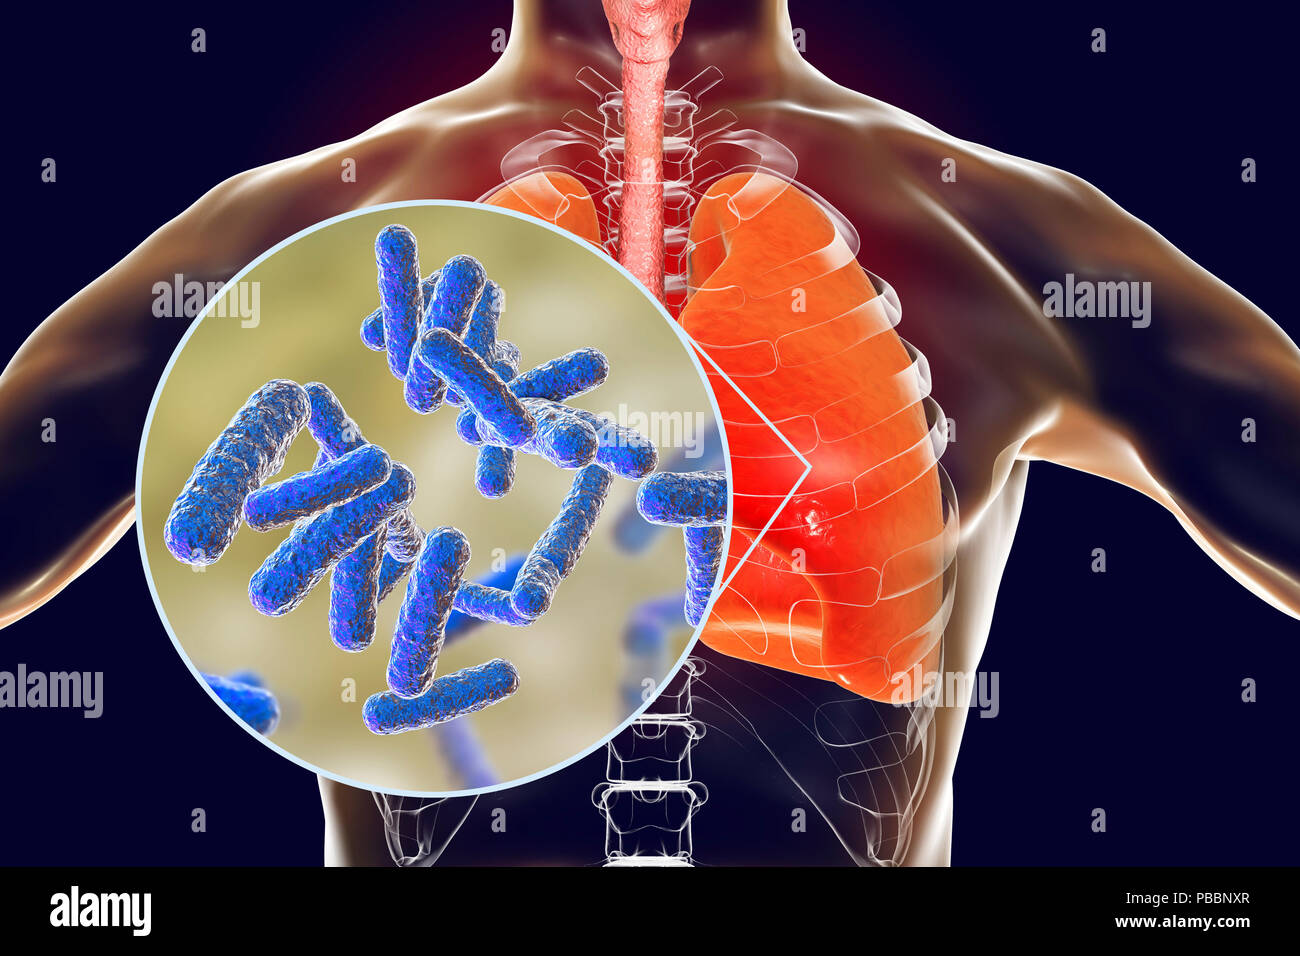 Bacterial pneumonia, conceptual illustration. Human lungs and close-up view of bacteria, one of the causative agents of pneumonia. Stock Photo